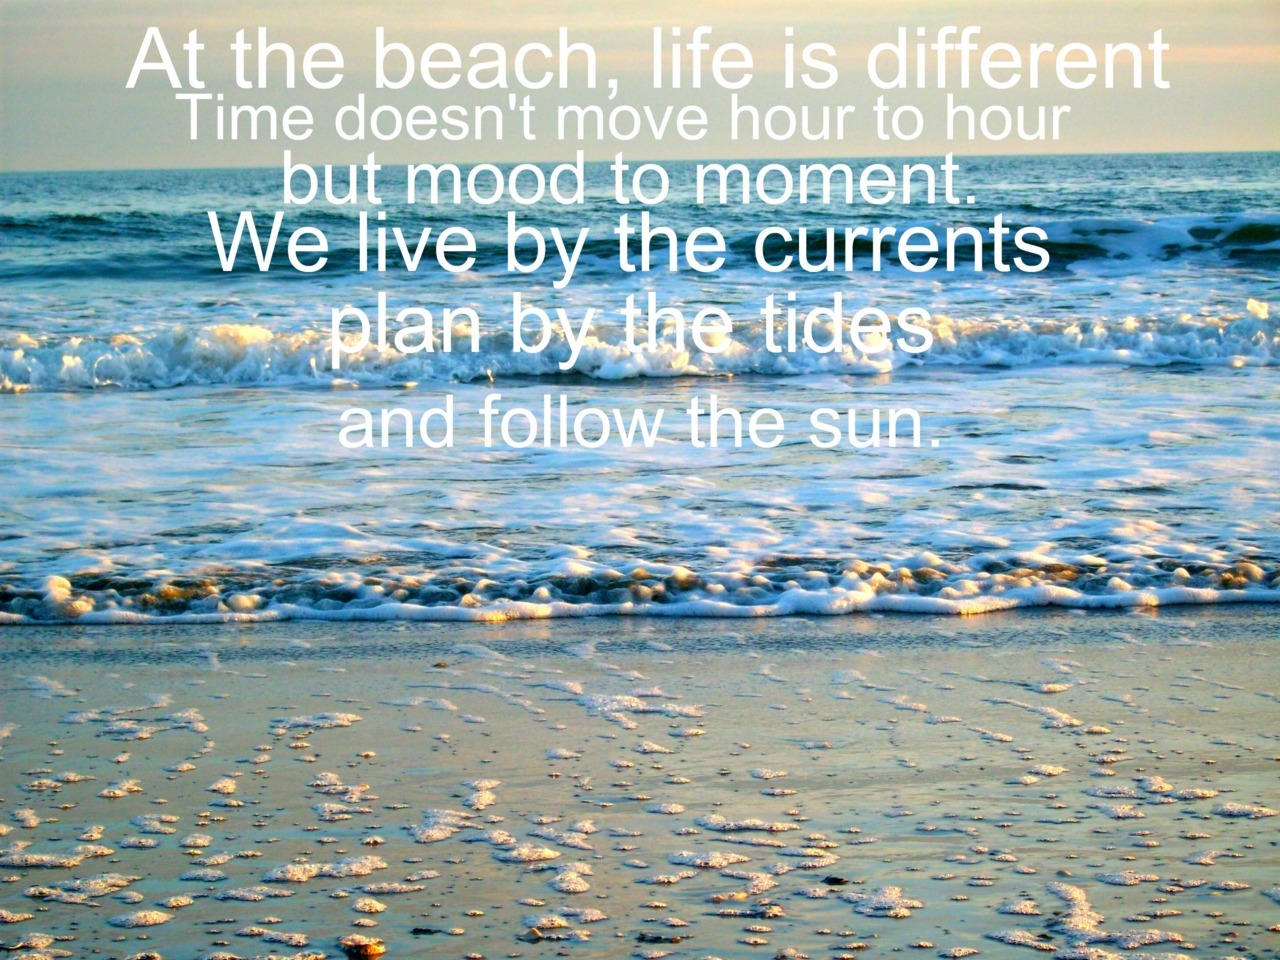 beach tumblr the for quotes Beach  The  Life  Quotes www.galleryhip.com Tumblr